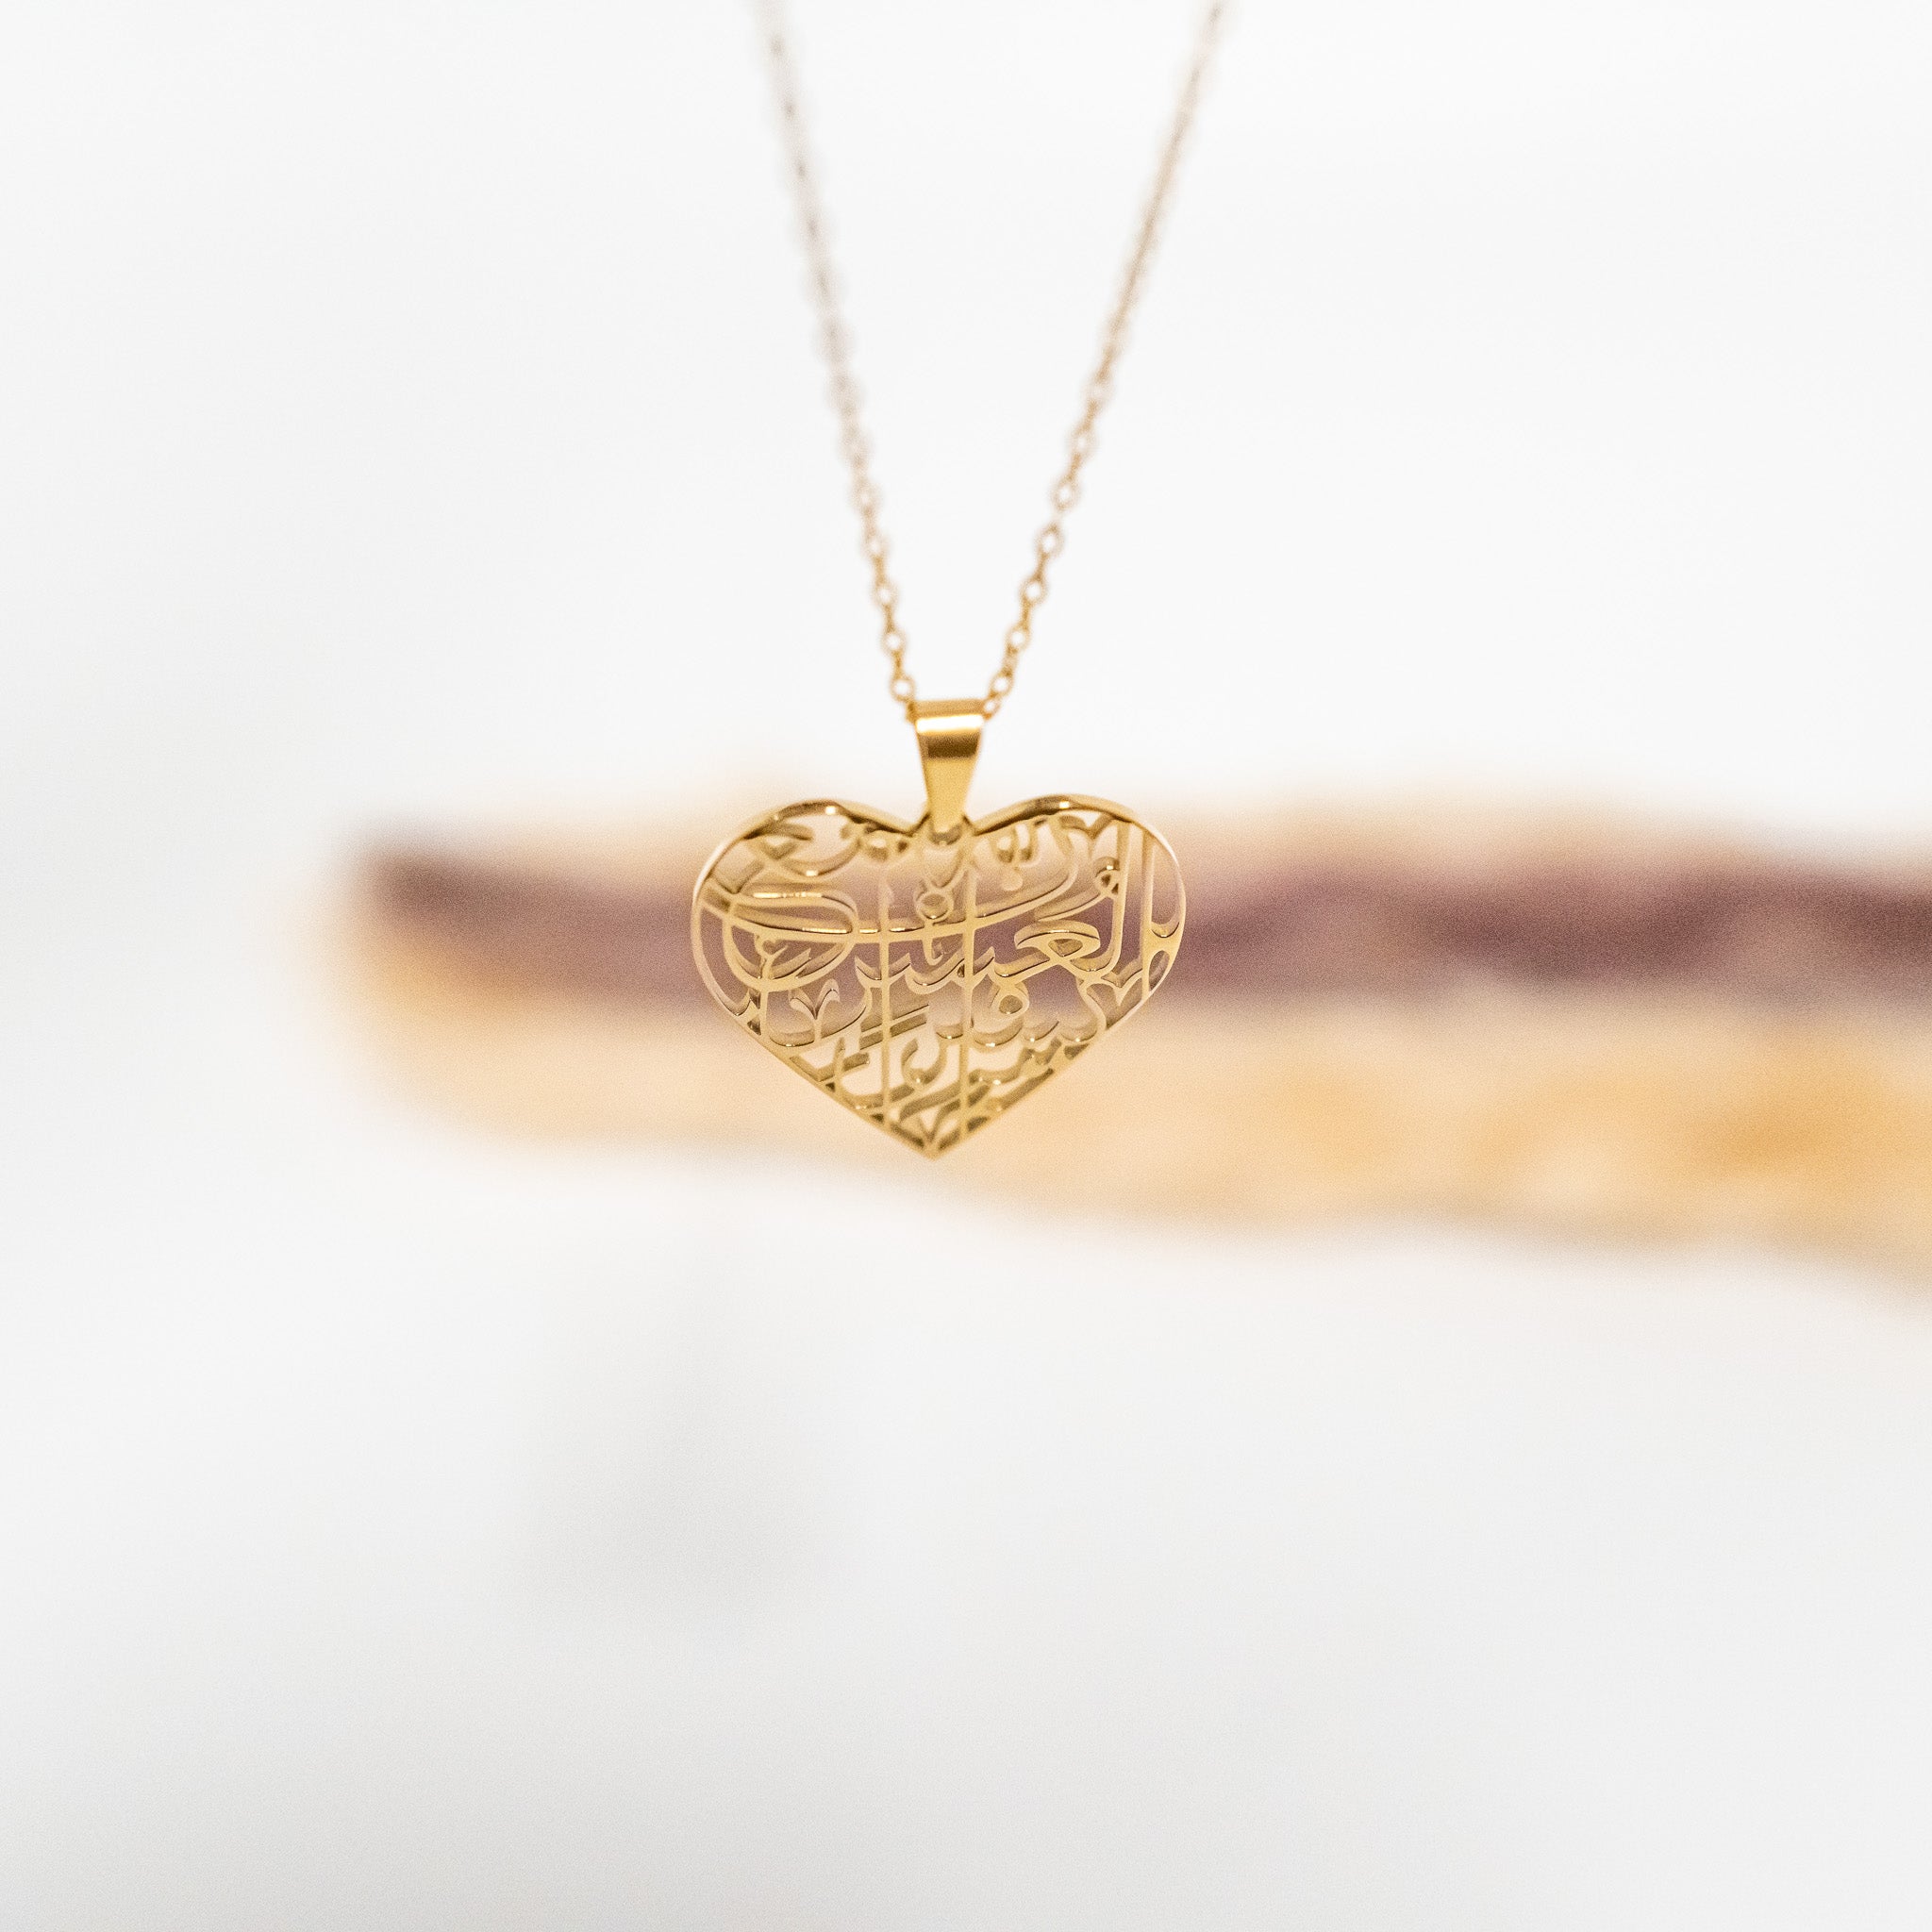 "Verily, with Hardship Comes Ease" Heart Shape Calligraphy Necklace